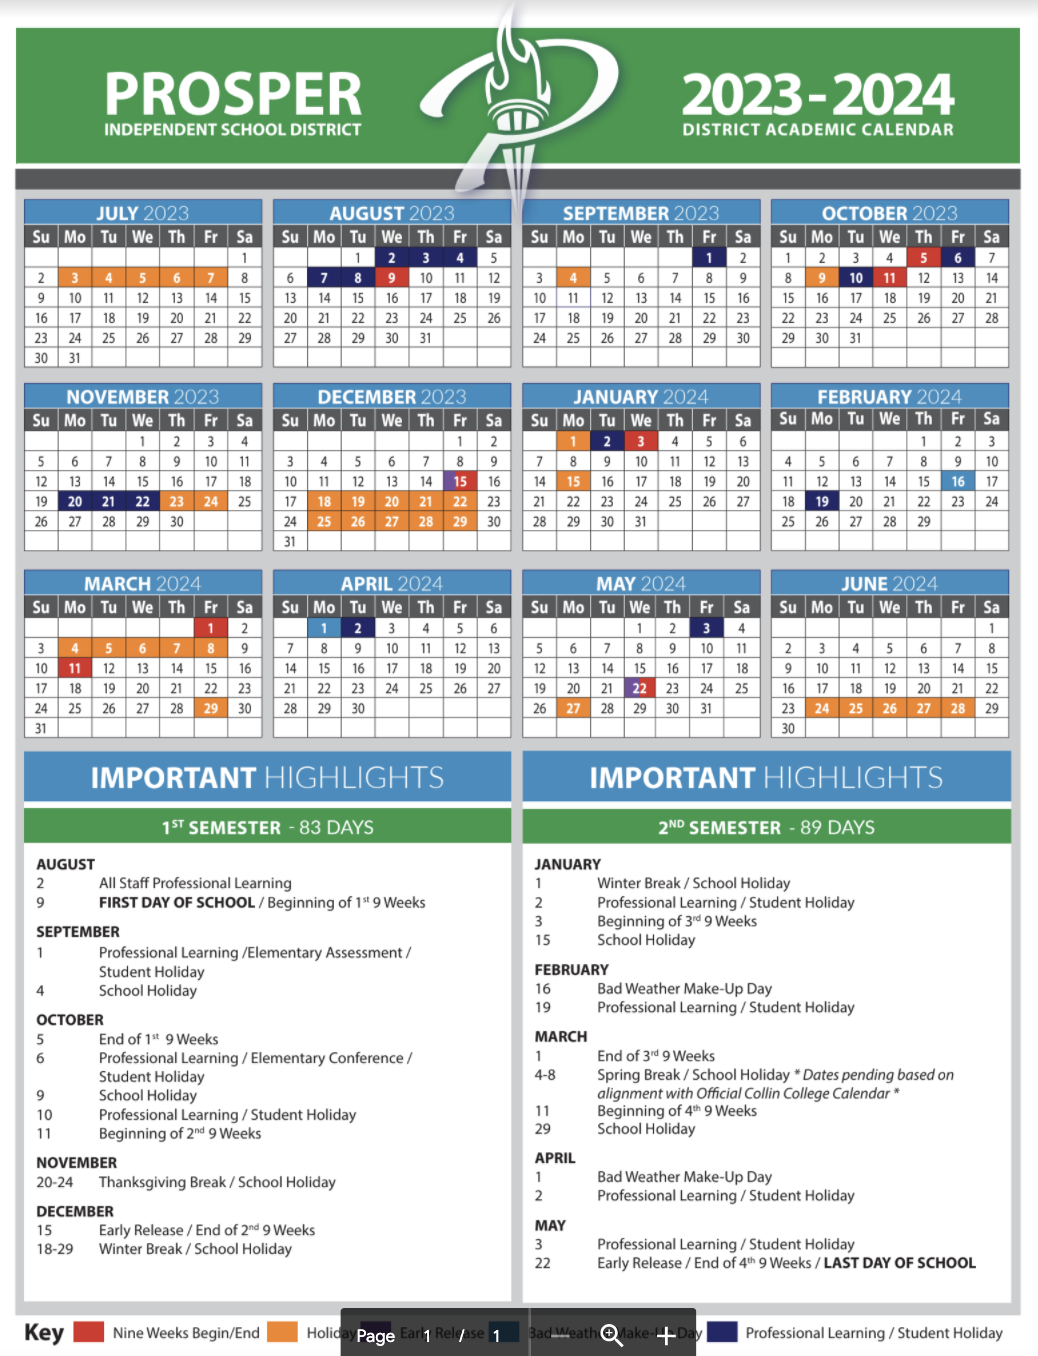 Frisco Isd Calendar 2022 Here Are Prosper Isd's School Calendars For The 2022-2023 And The 2023-2024  School Years | Cities | Checkoutdfw.com